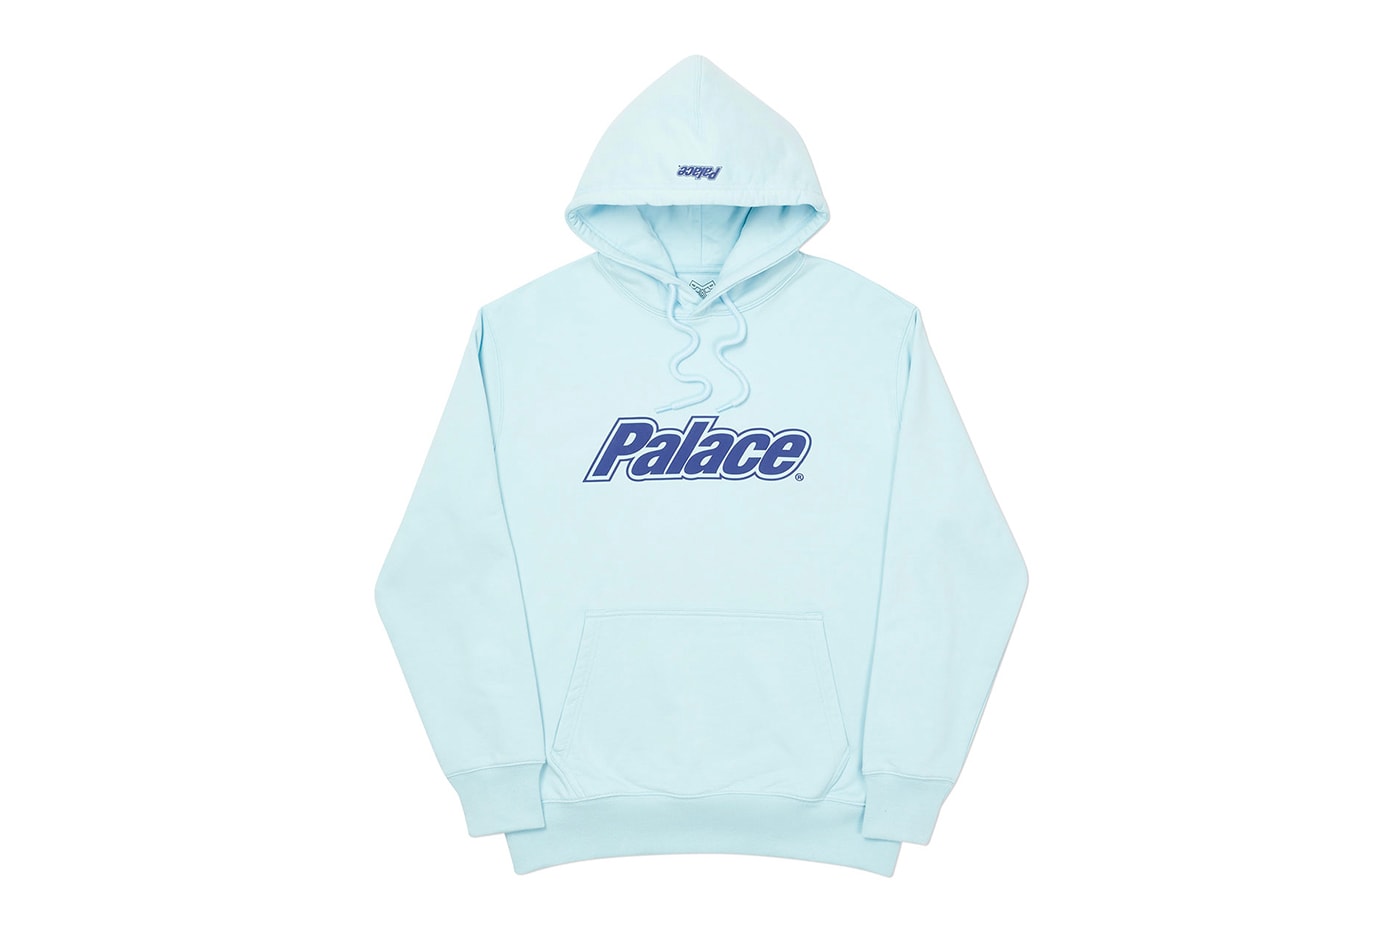 Palace Winter 2020 Sweatshirts and Hoodies tri ferg collection drop info